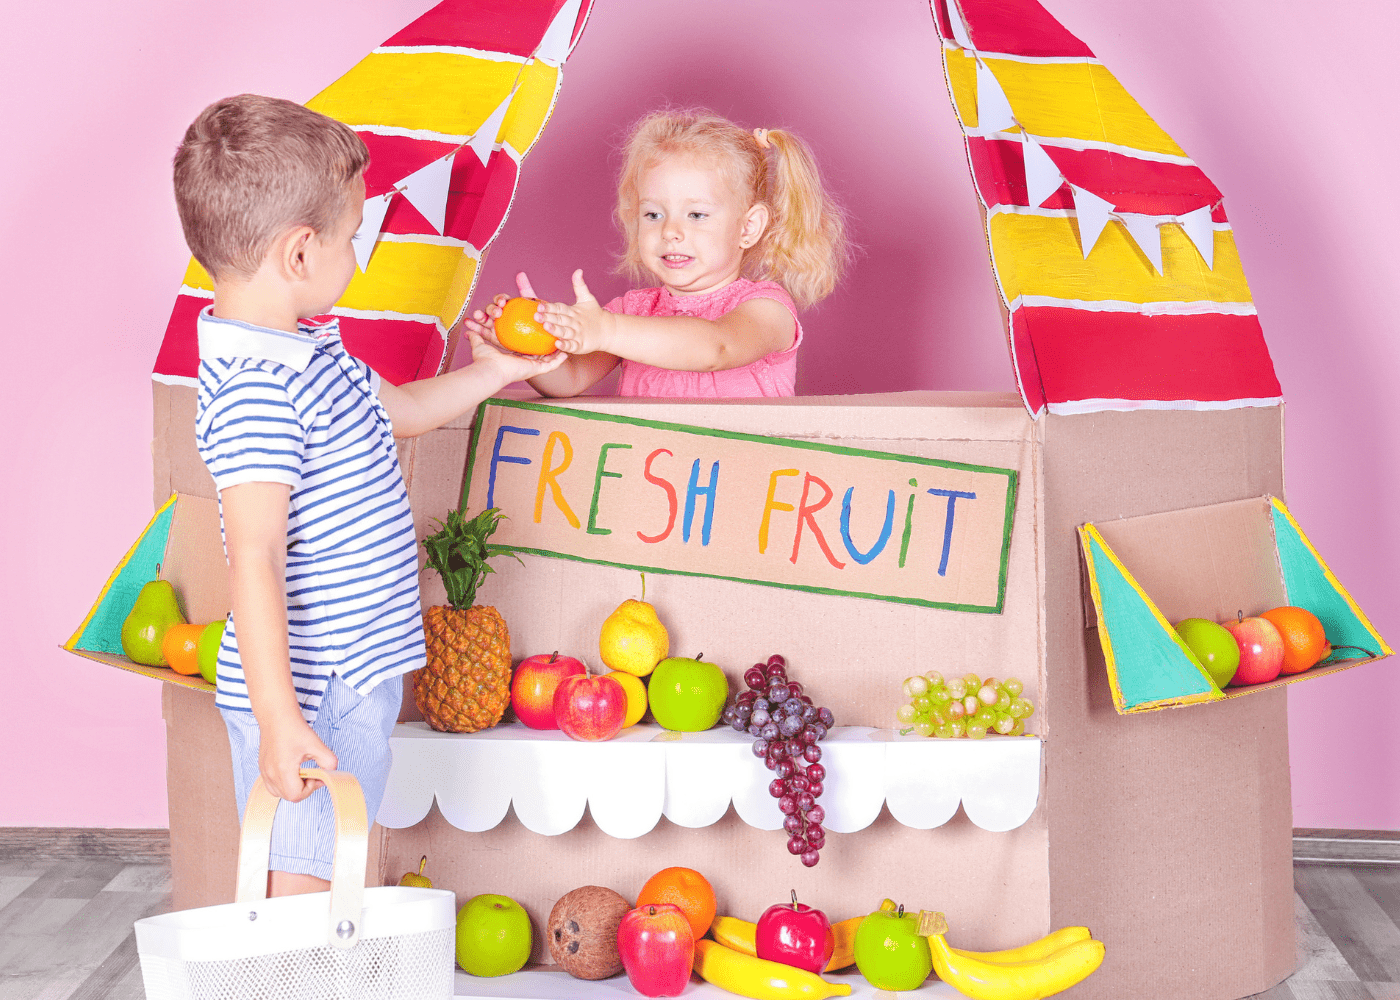 Two children in a carboard stand that says "fresh fruit. " they are pretending to buy and sell fake fruit.